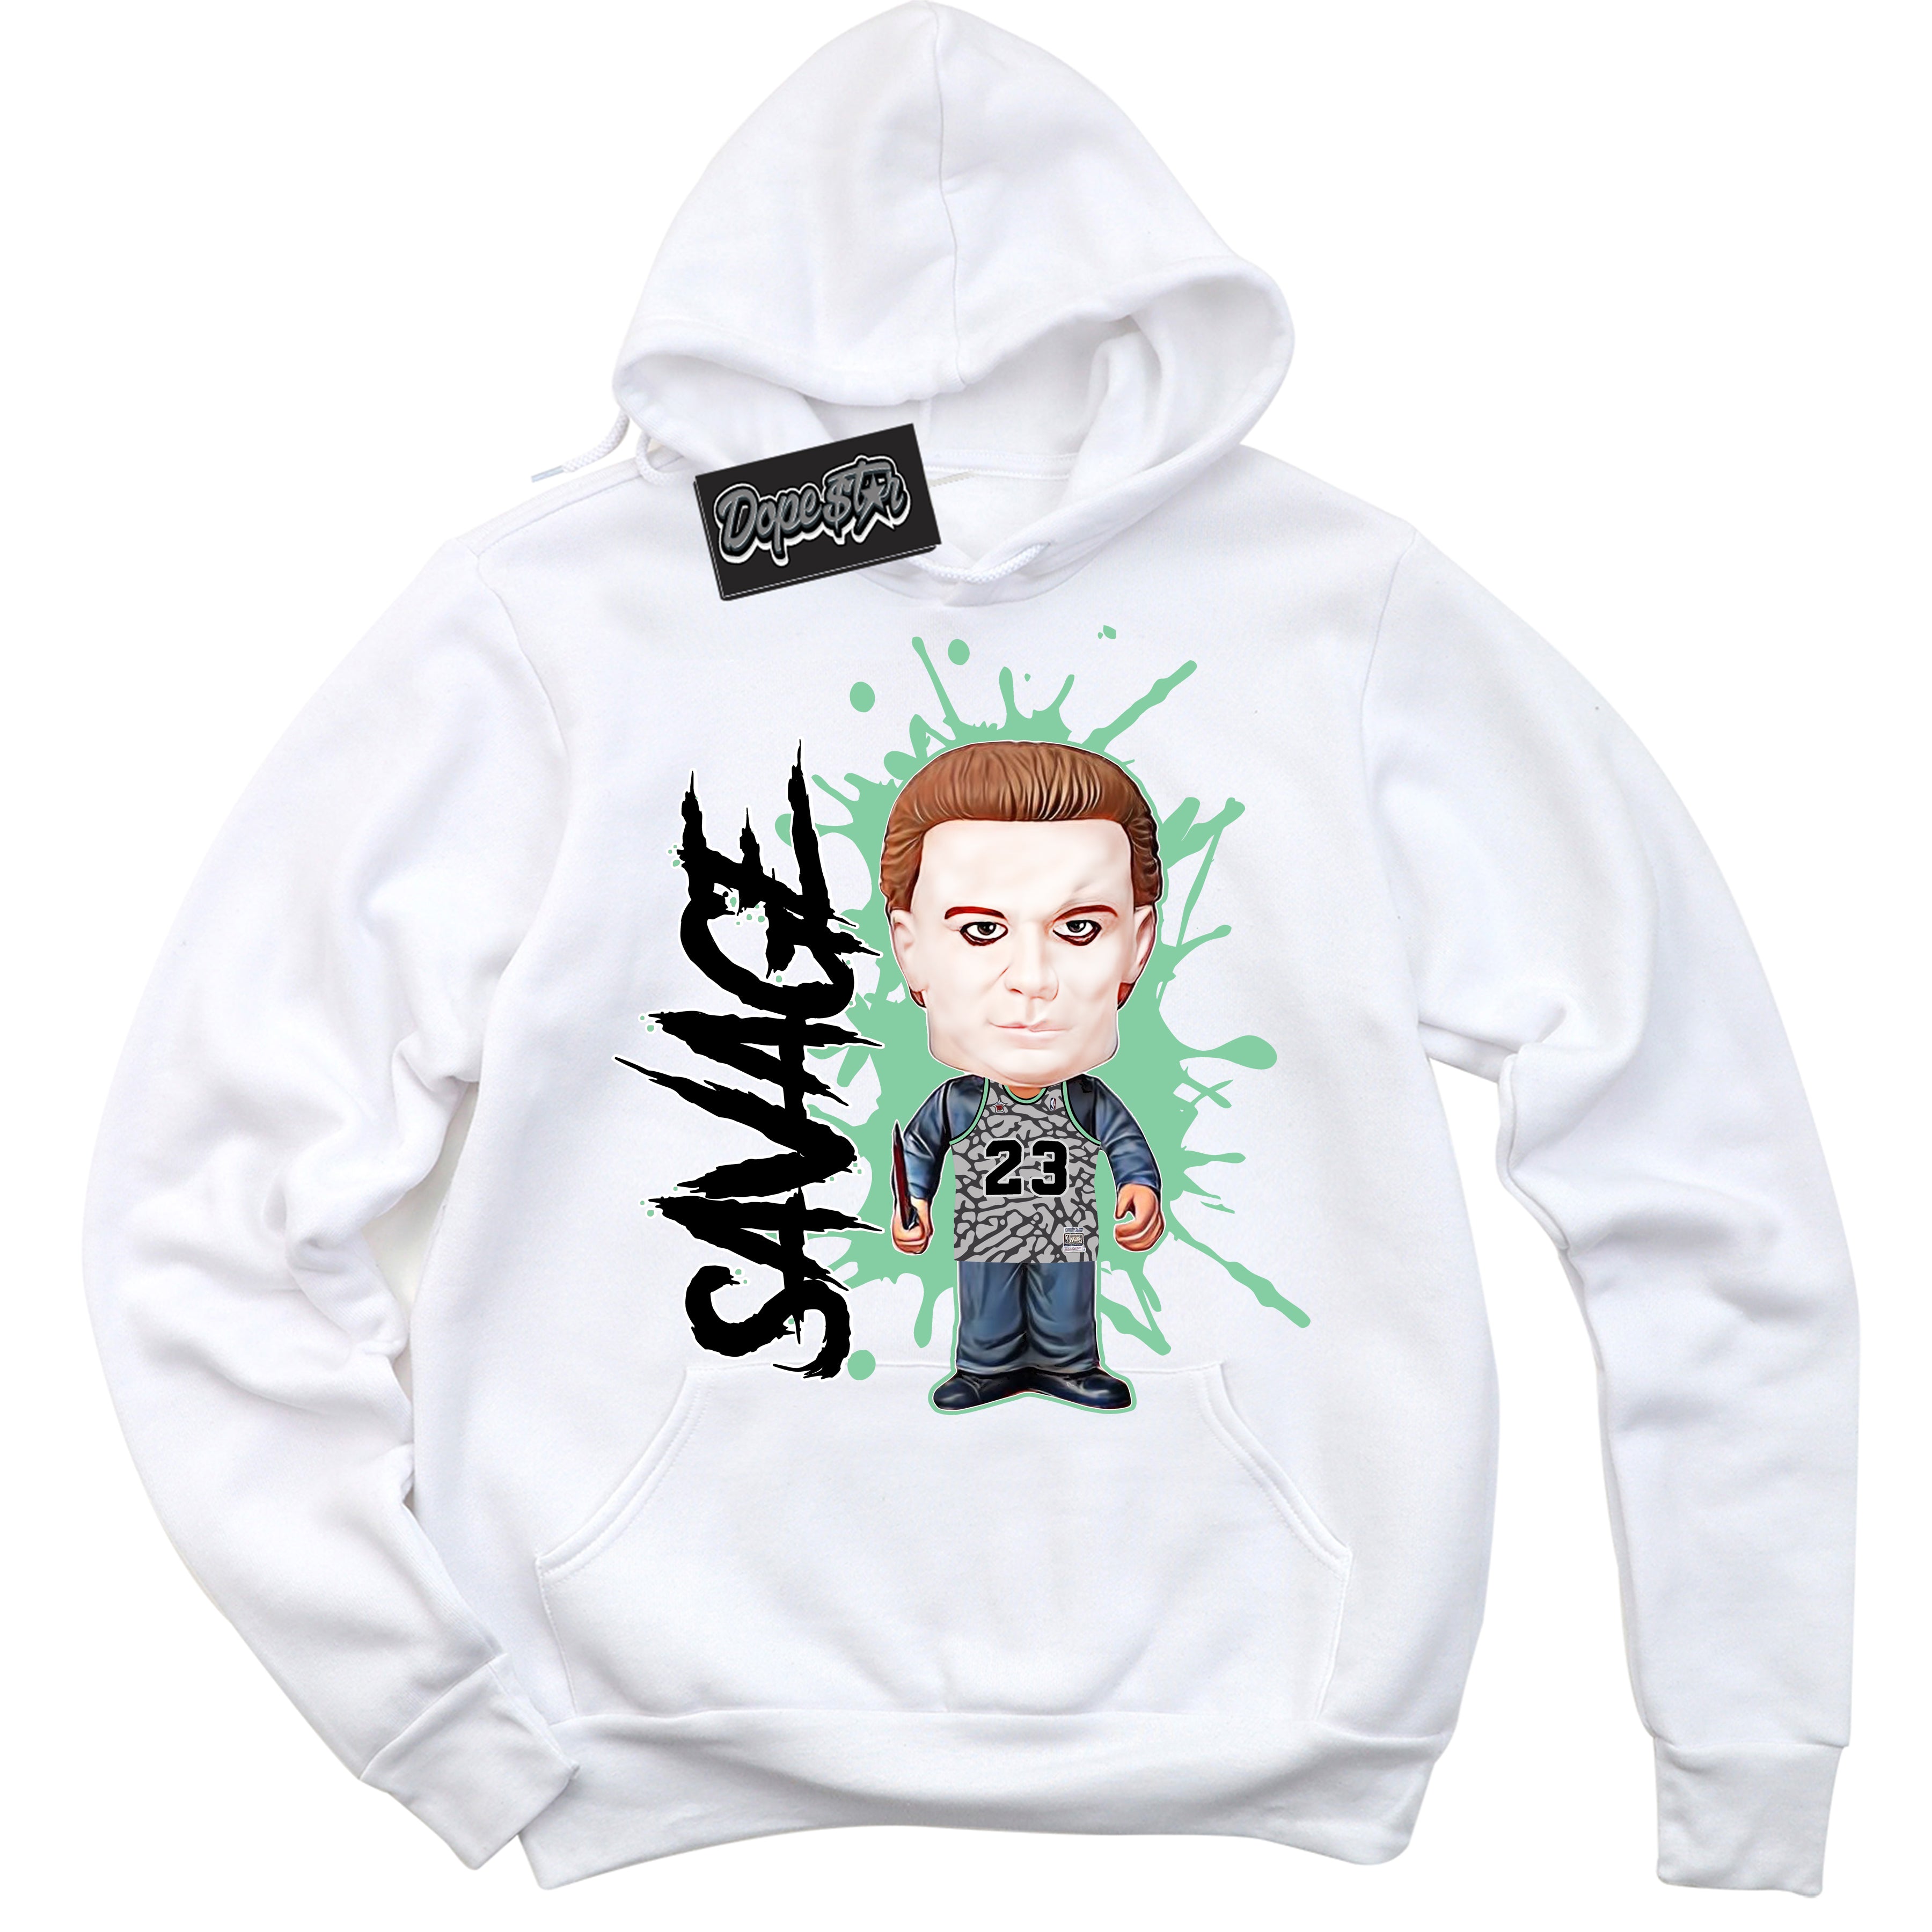 Cool White Graphic DopeStar Hoodie with “ Michael Myers Savage “ print, that perfectly matches Green Glow 3s sneakers